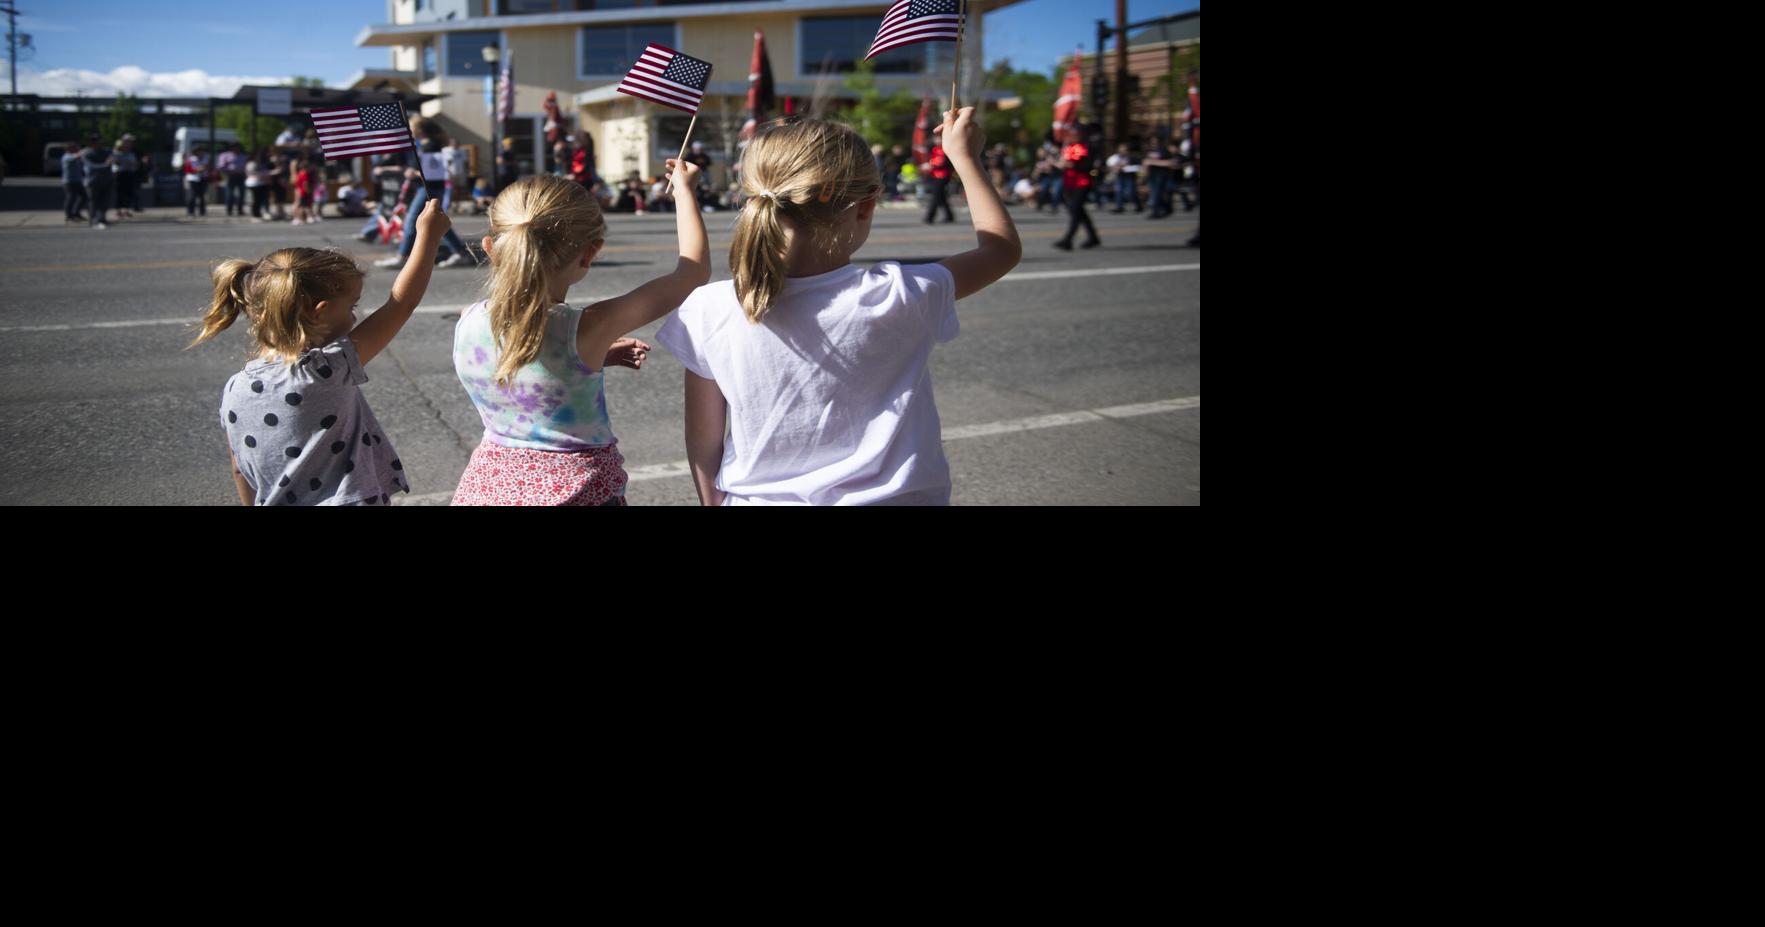 Bozeman marks Memorial Day with 14th annual parade News